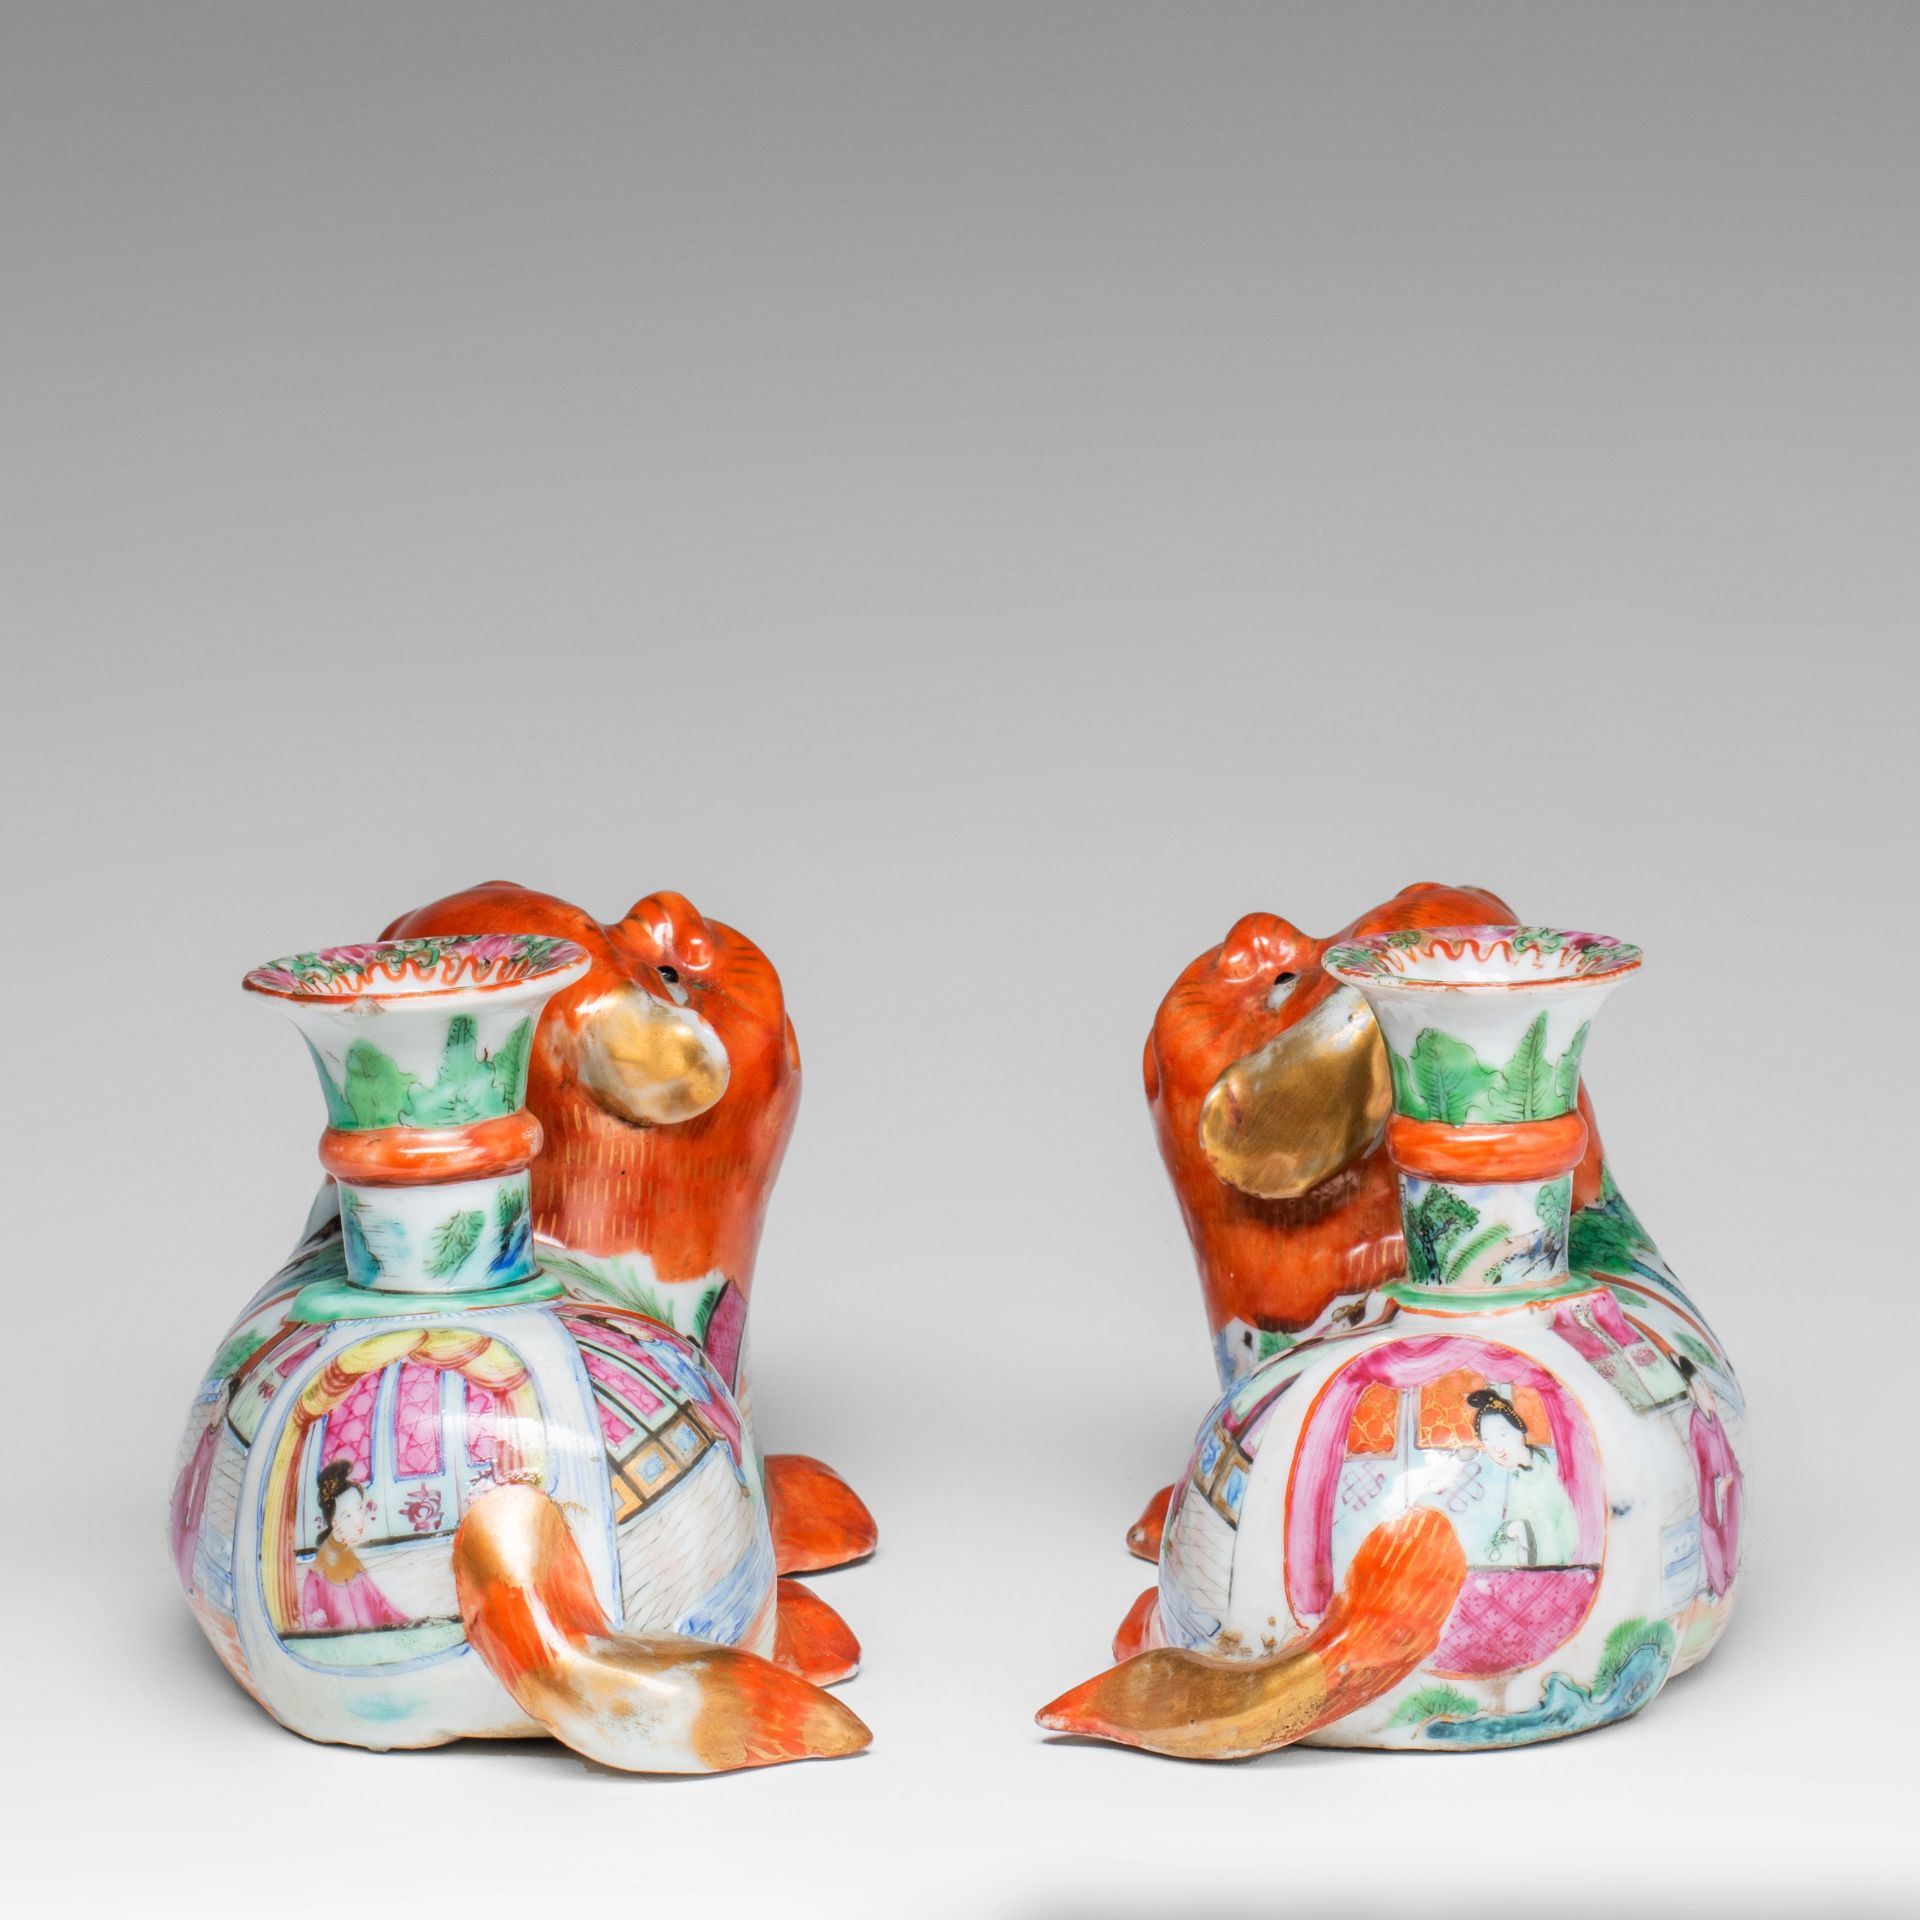 A fine pair of Chinese Canton joss stick holders in the shape of Fu dogs, 19thC, H 11,5 - L 20 cm - Image 5 of 9